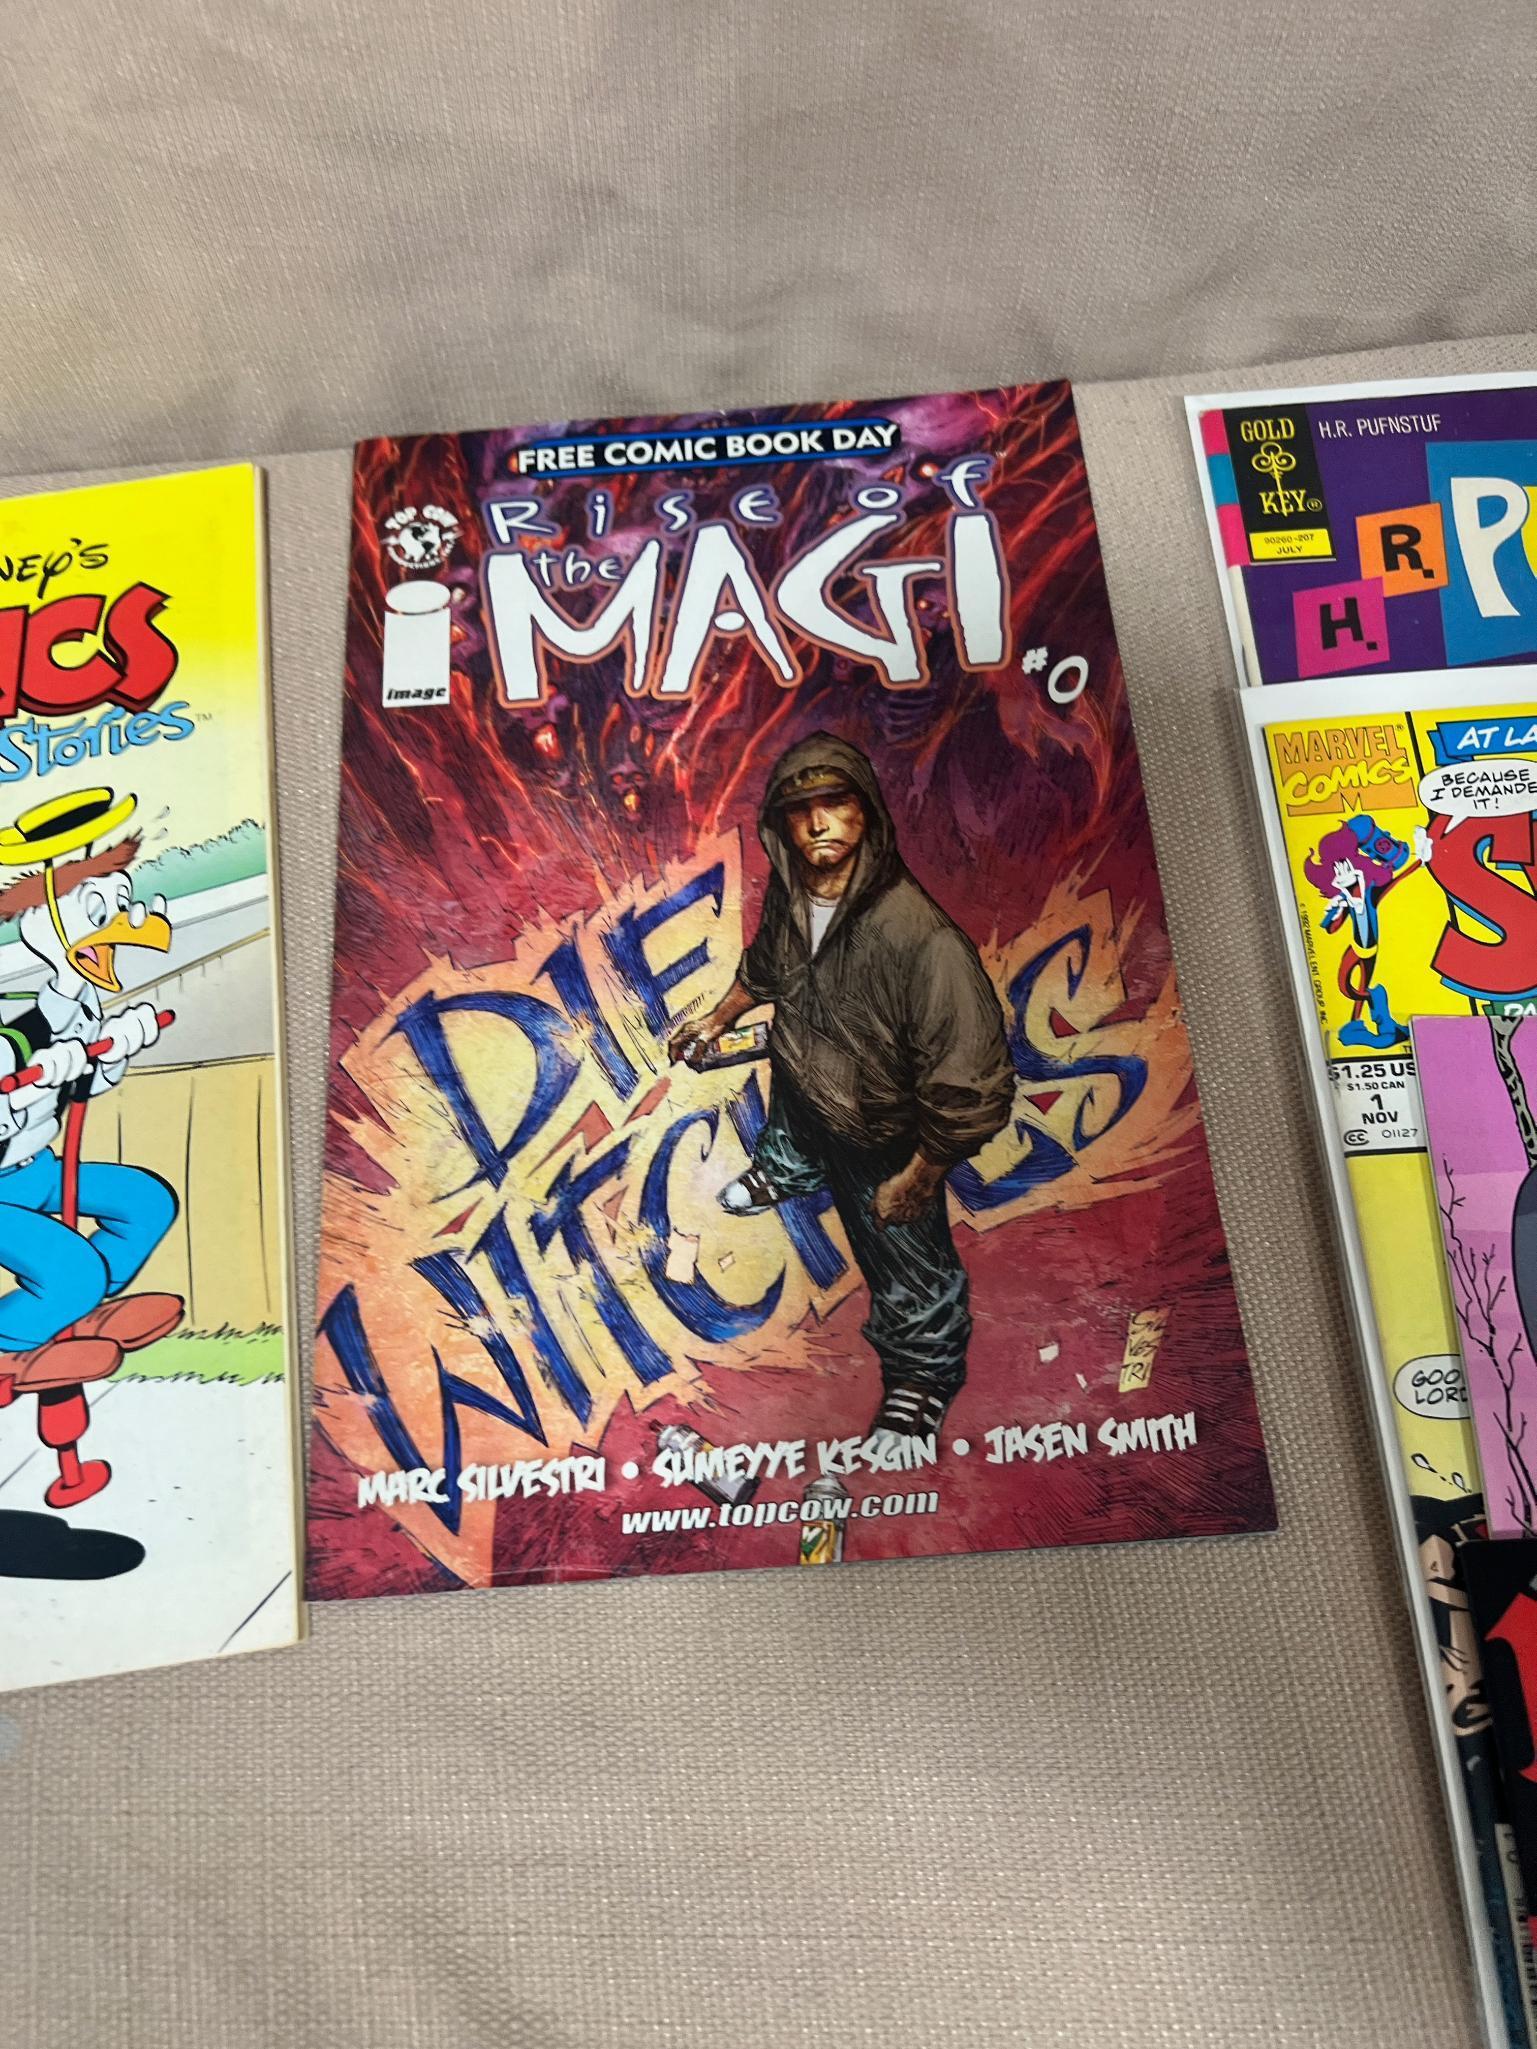 20 Asst. Comic Books, see pics for comics included